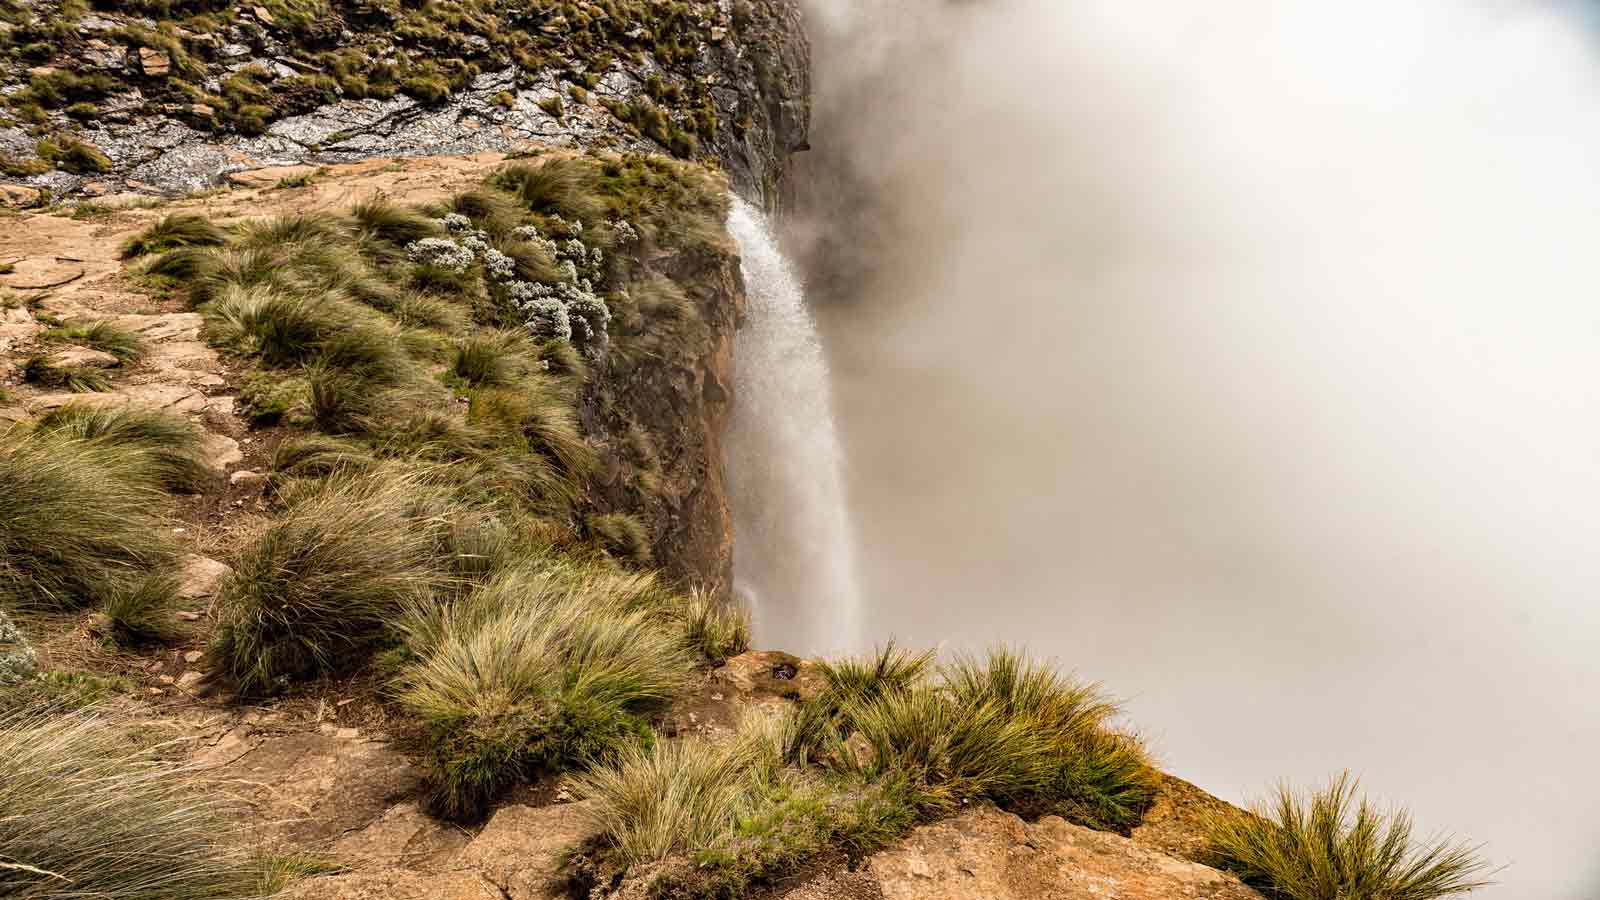 <p>Only some people know this, but Tugela Falls was declared the world’s tallest waterfall in 2021. For the hikers and adventurers, the 7.5-mile roundtrip hike includes chain ladders. The views are worth all the huffing and puffing. </p>